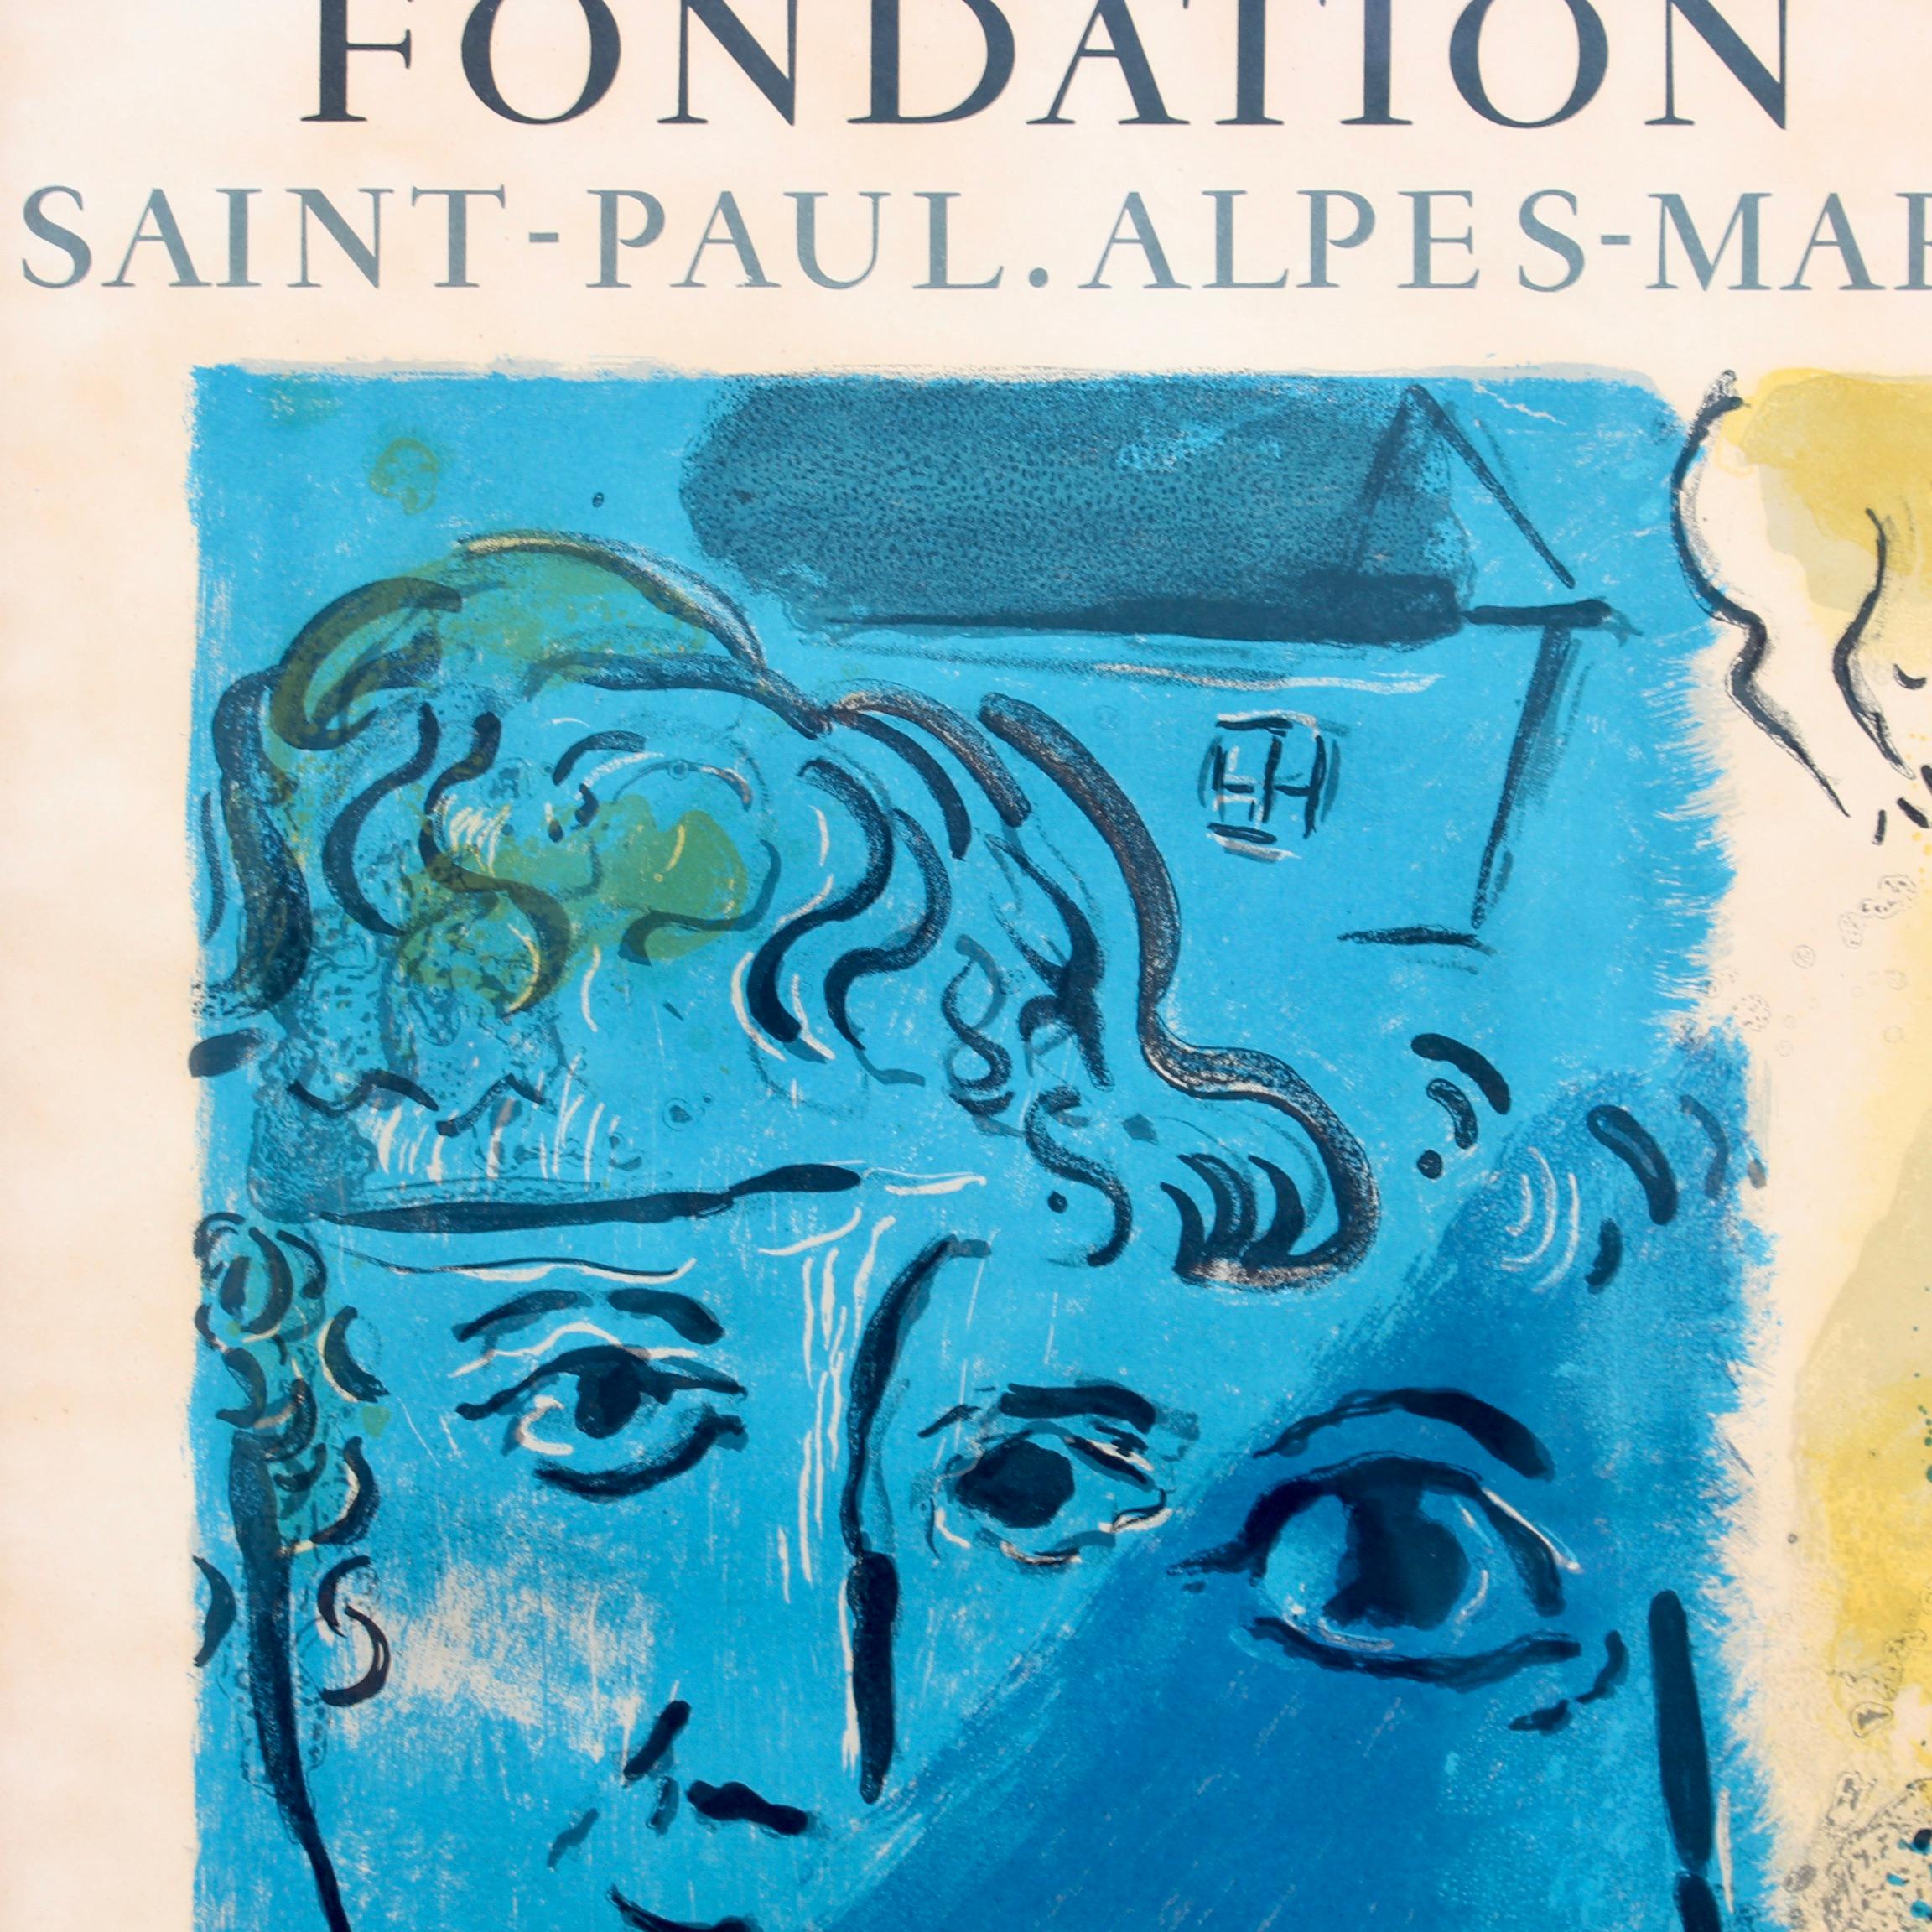 An exhibition poster with the artist's original signature in the lower right-hand corner. This poster was created for an exhibition of paintings between 1947 through 1967 at the Maeght Foundation in Saint Paul (Alpes Maritimes). It is in an edition